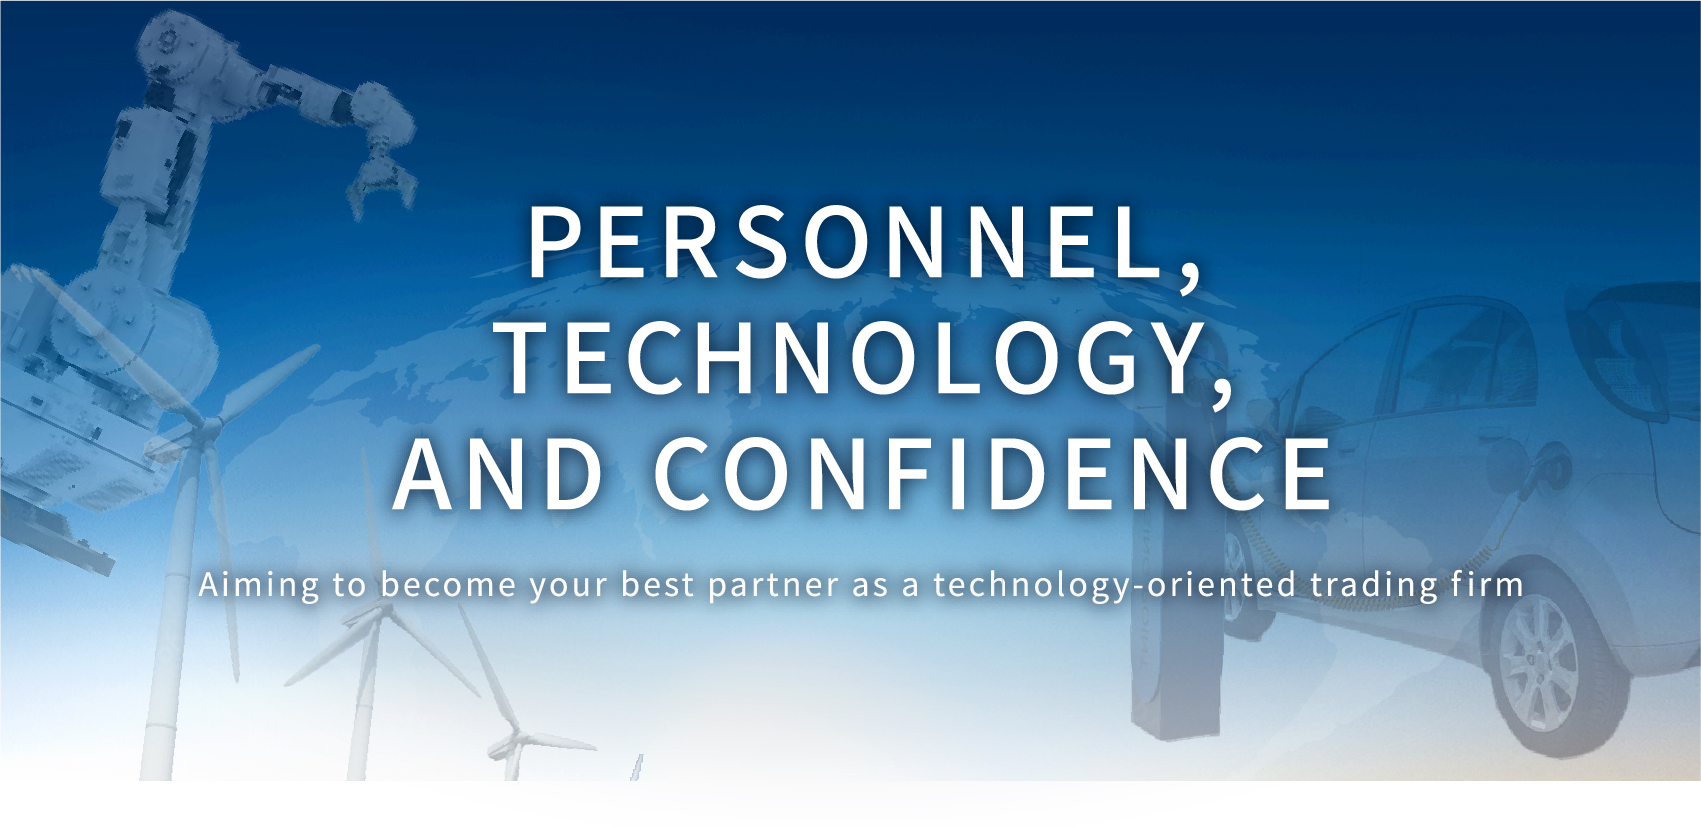 PERSONNEL, TECHNOLOGY, AND CONFIDENCE